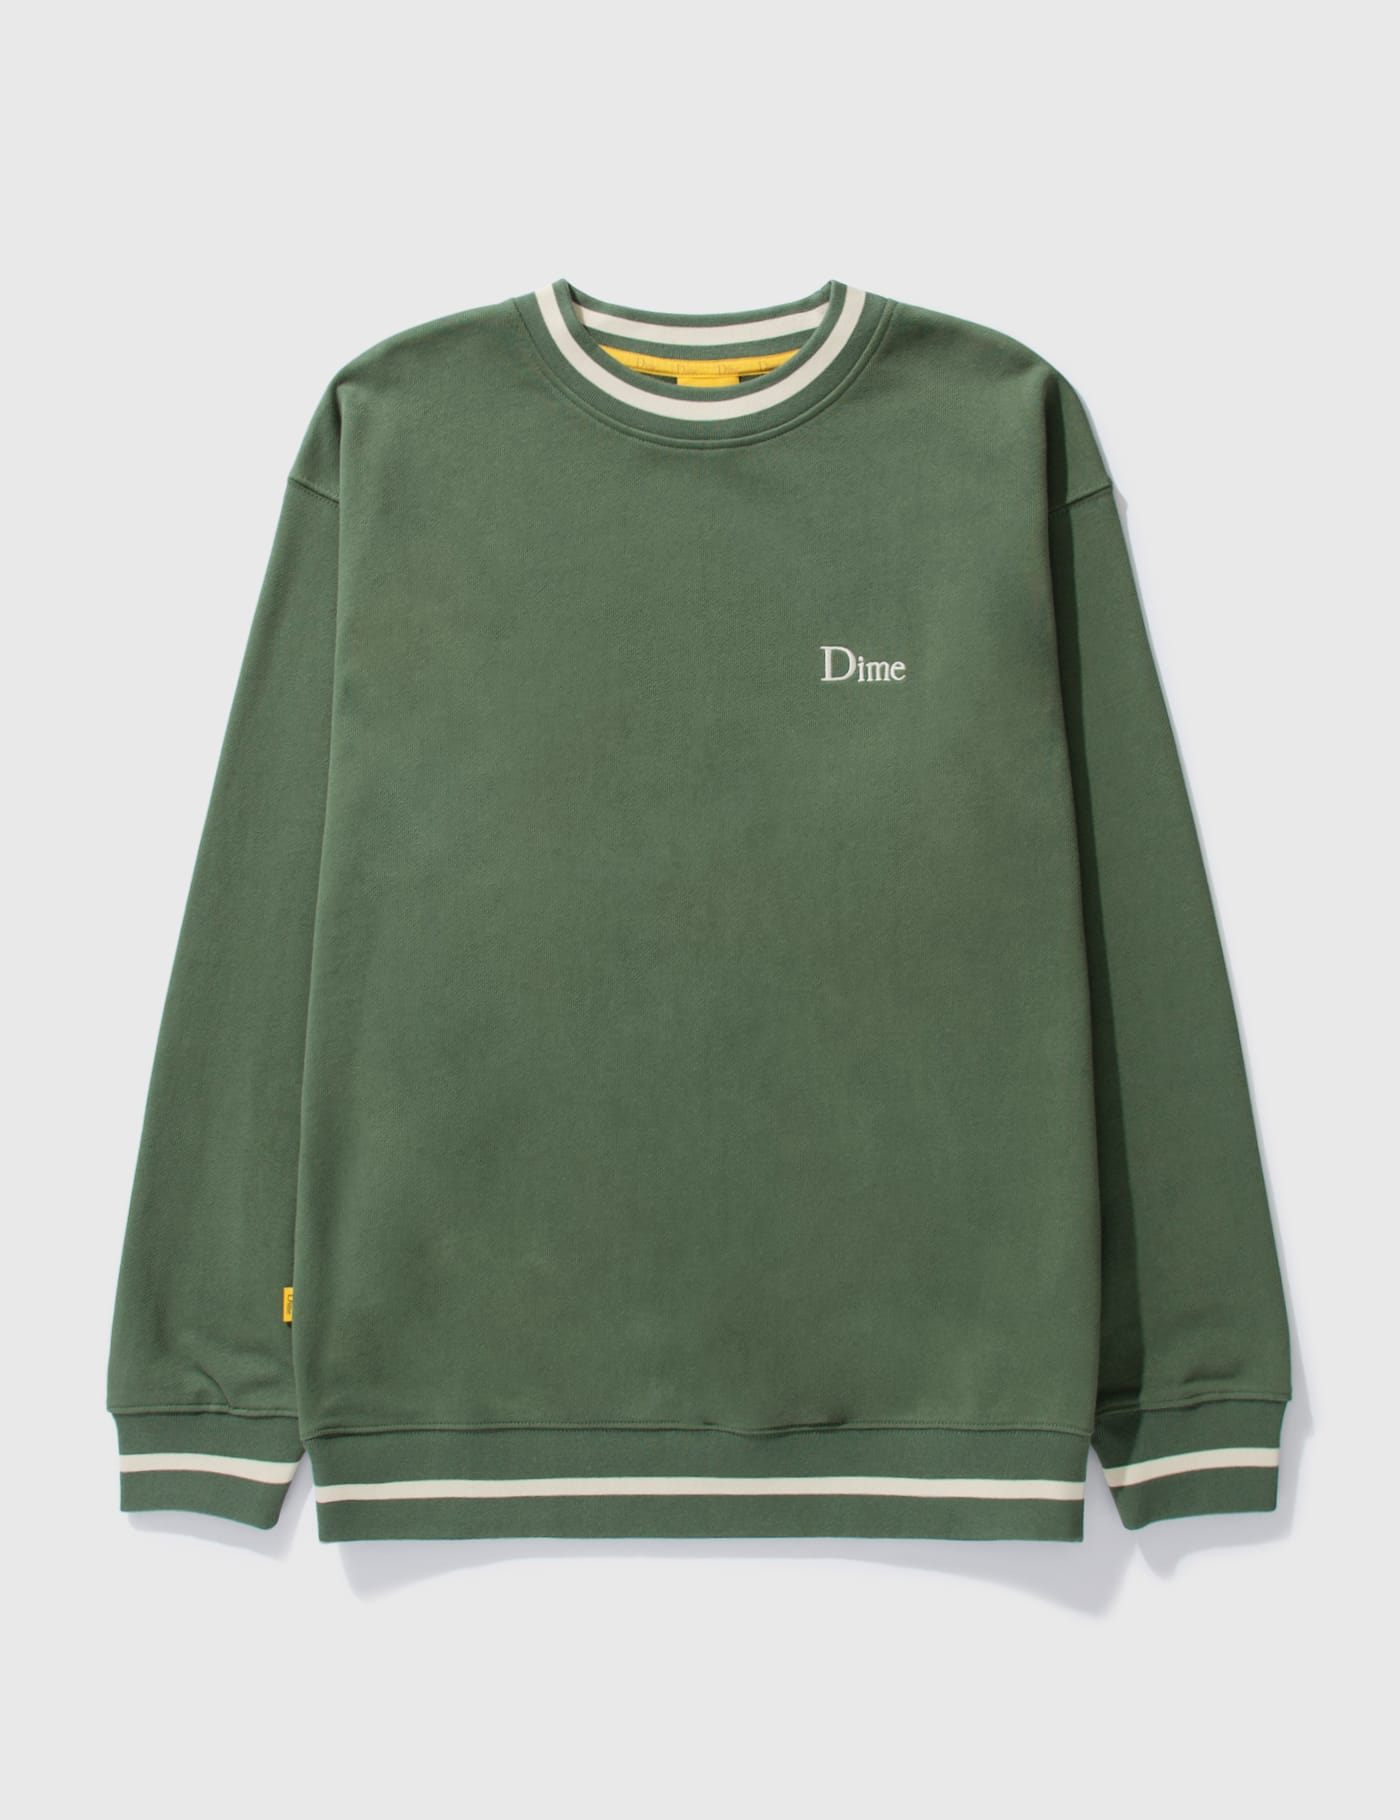 Dime - Classic French Terry Crewneck | HBX - Globally Curated